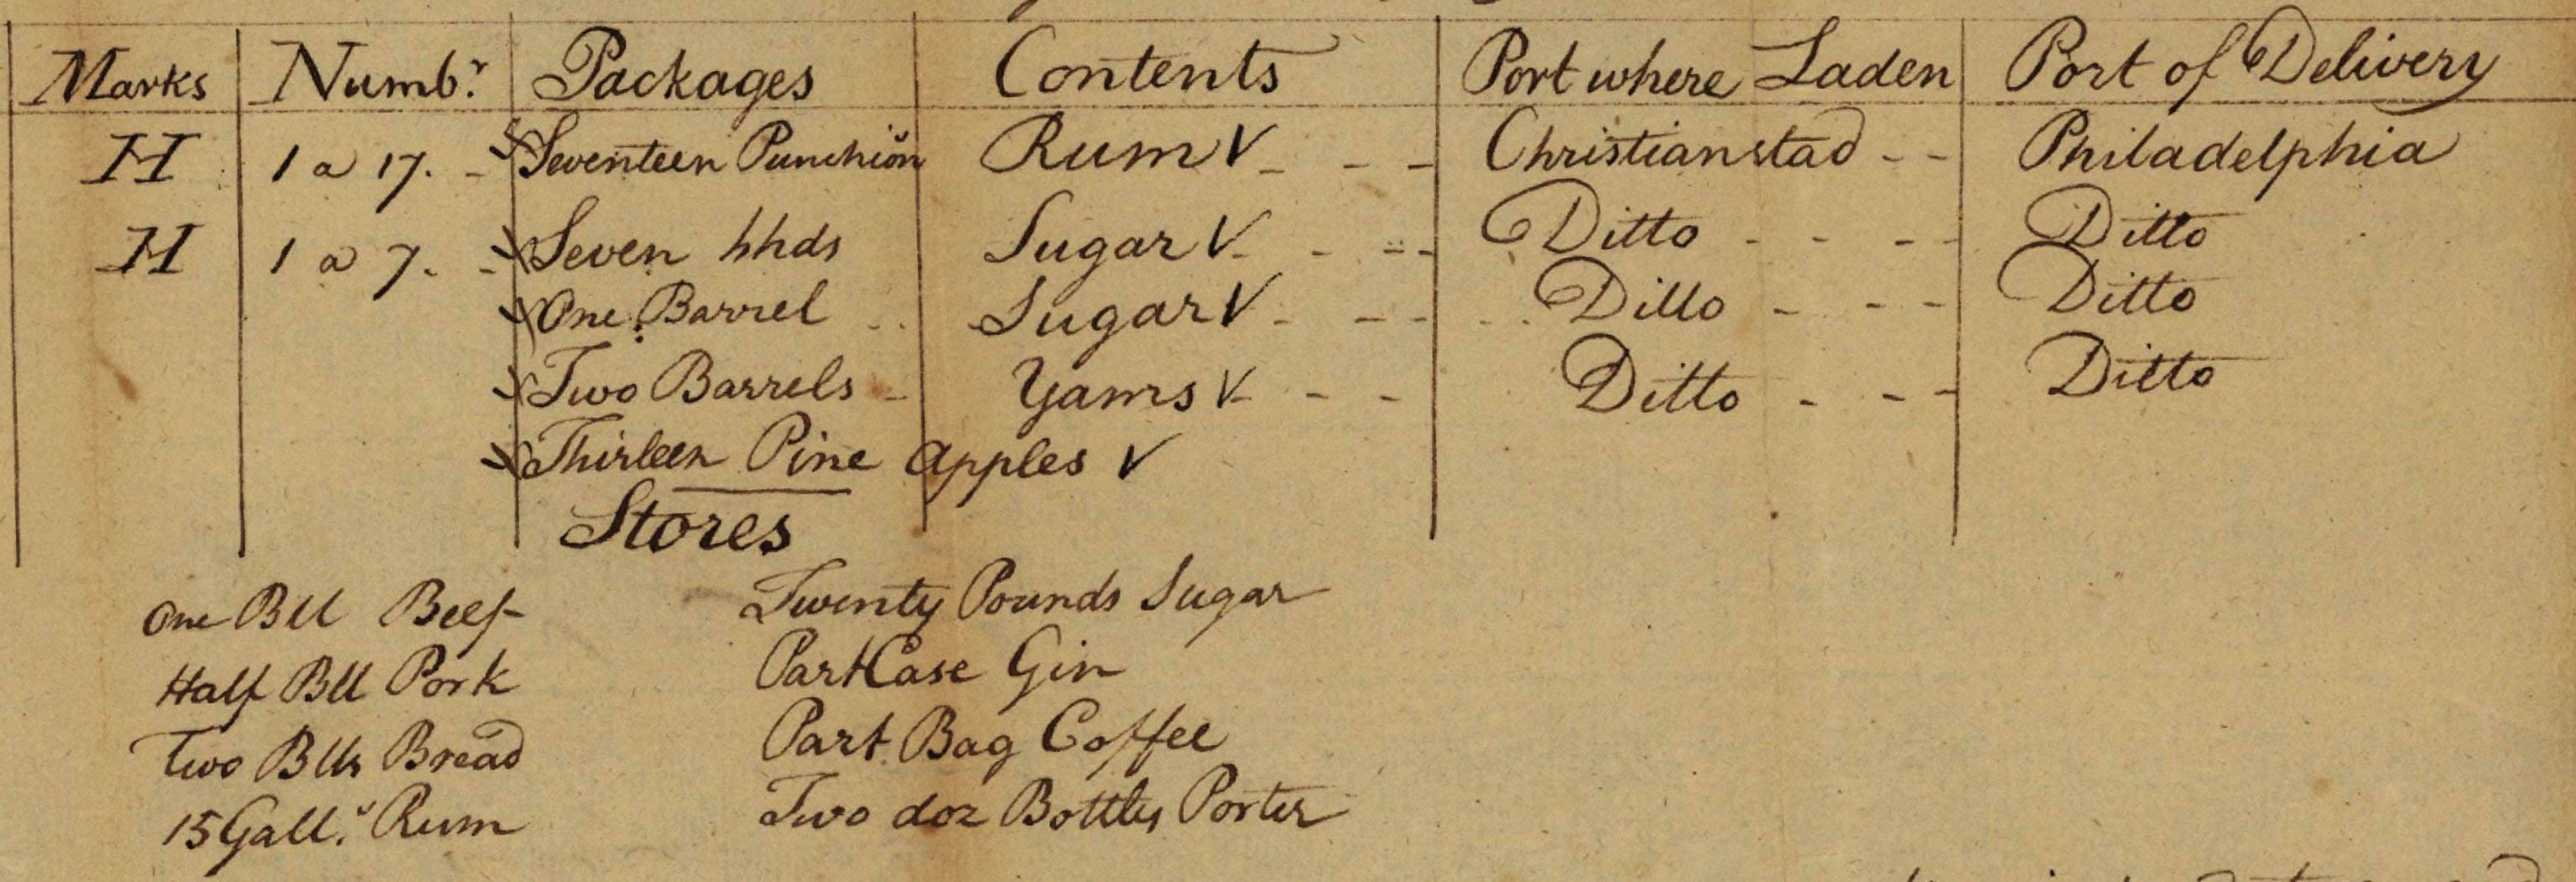 Report and Manifest of Cargo, detail, 1793